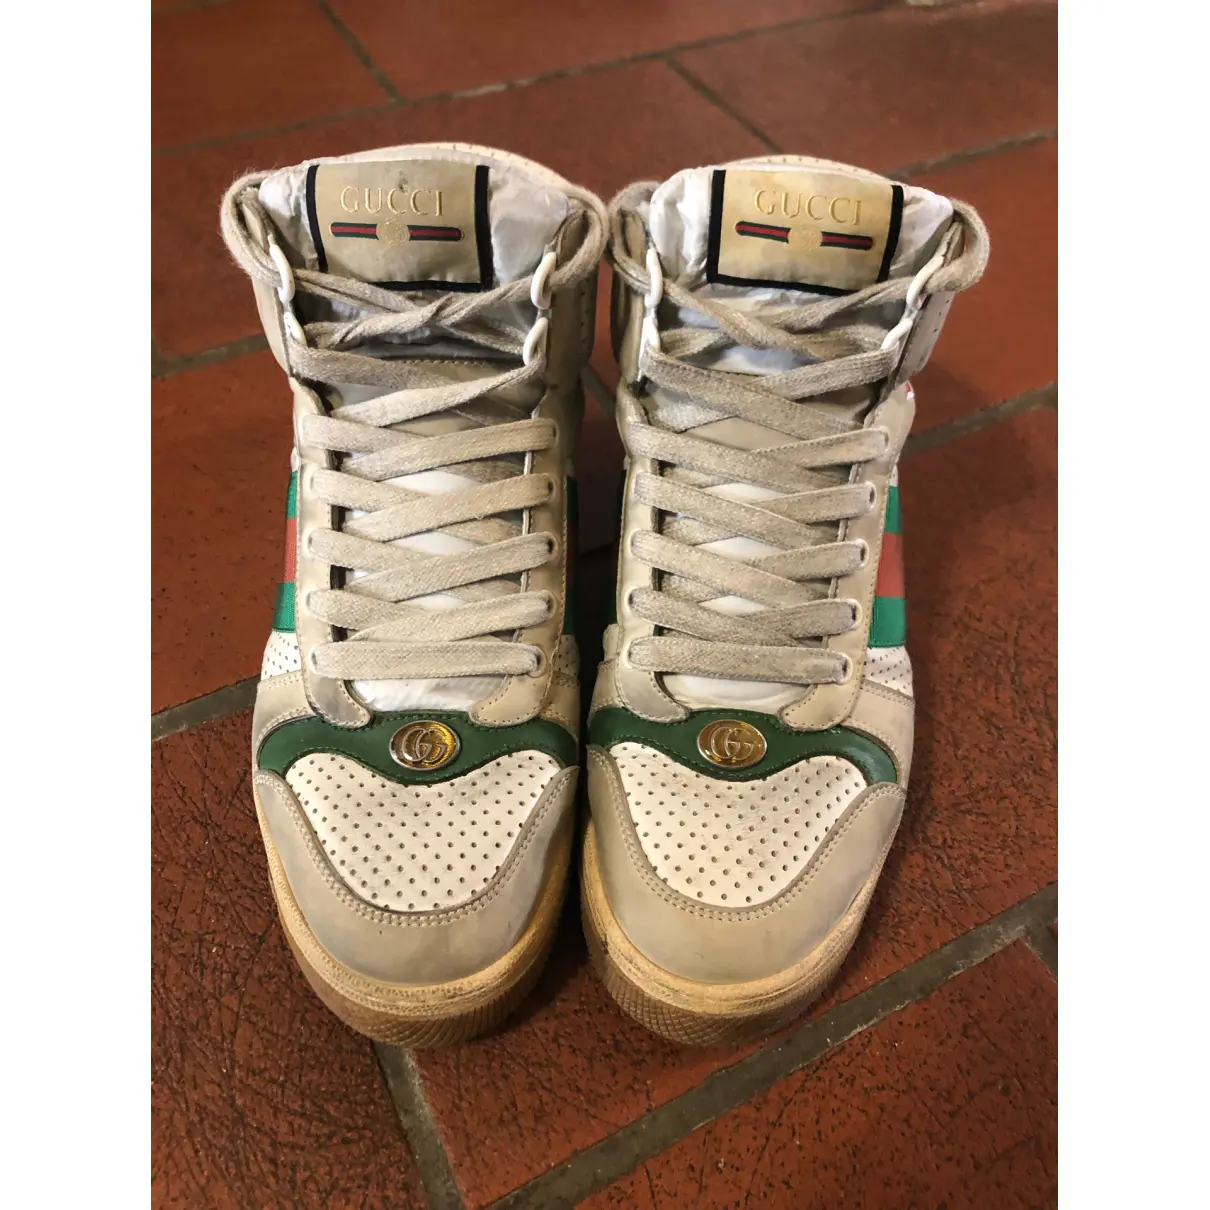 Buy Gucci Screener leather high trainers online